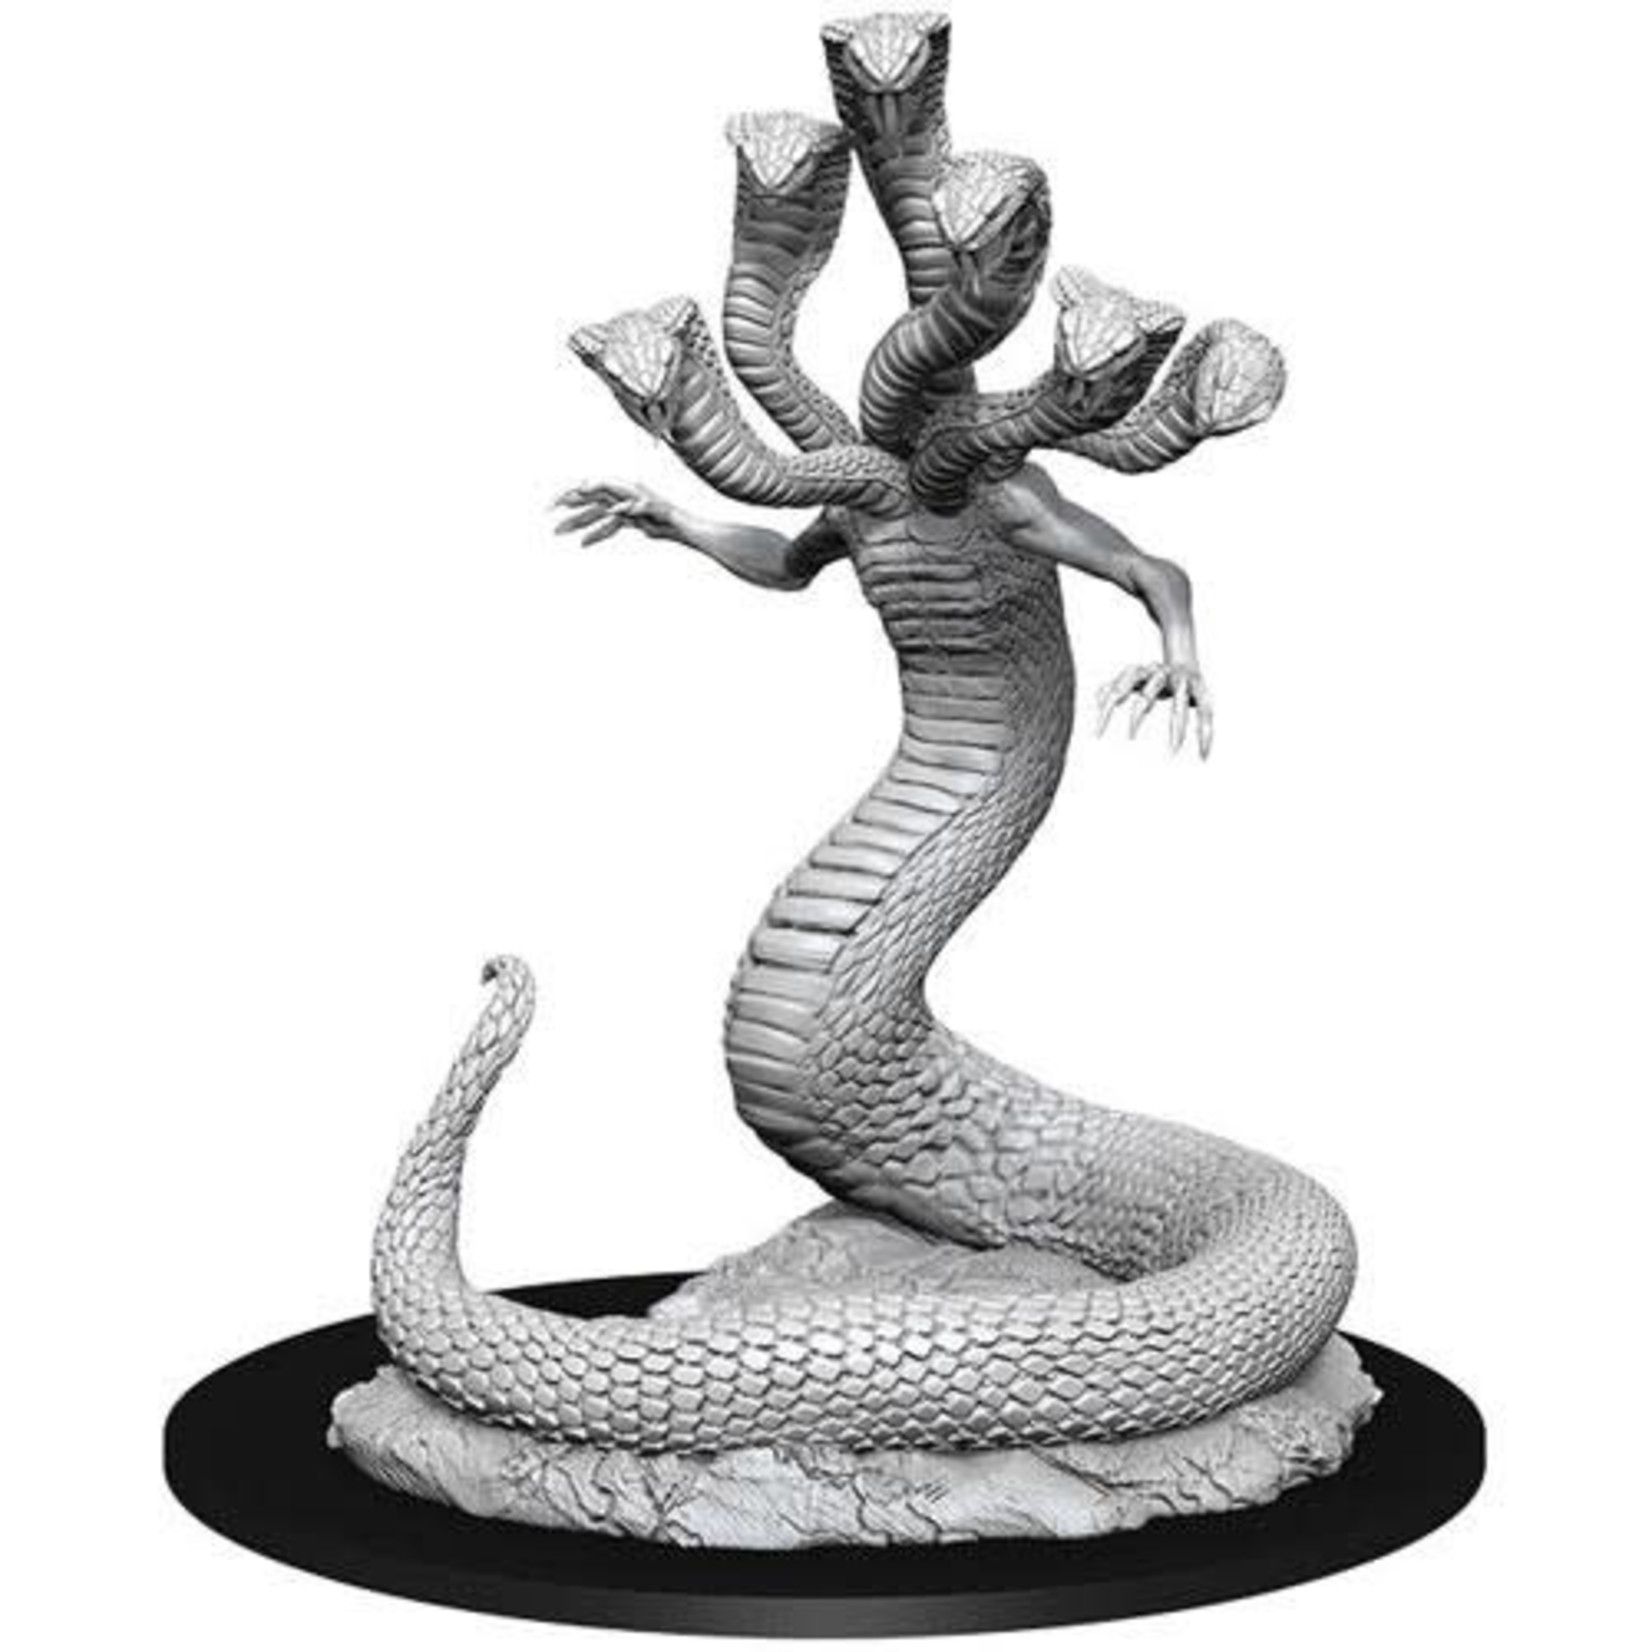 WizKids Dungeons and Dragons Nolzur's Marvelous Minis Yuan-Ti Anathema